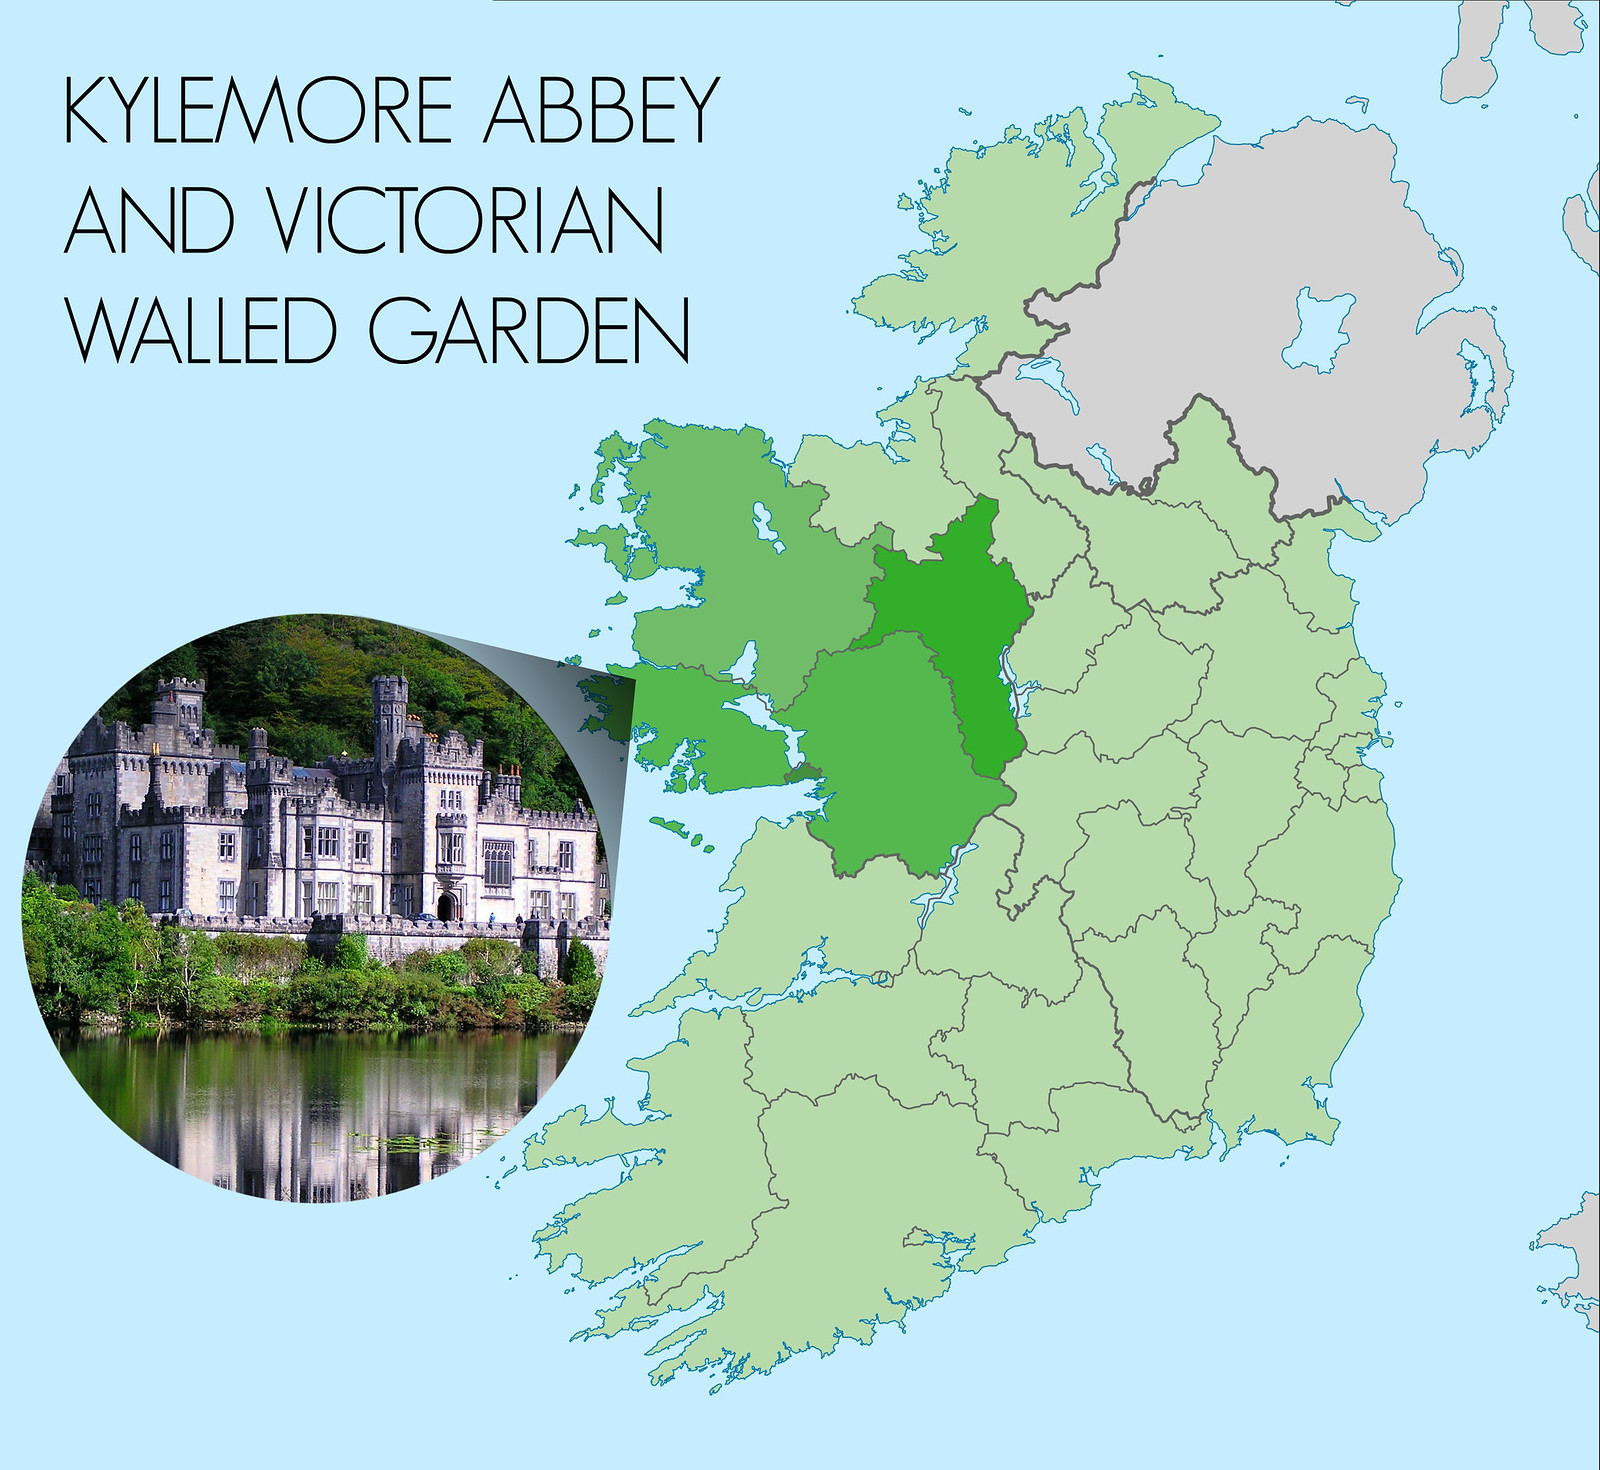 Kylemore Abbey in County Galway on the beautiful west coast of Ireland